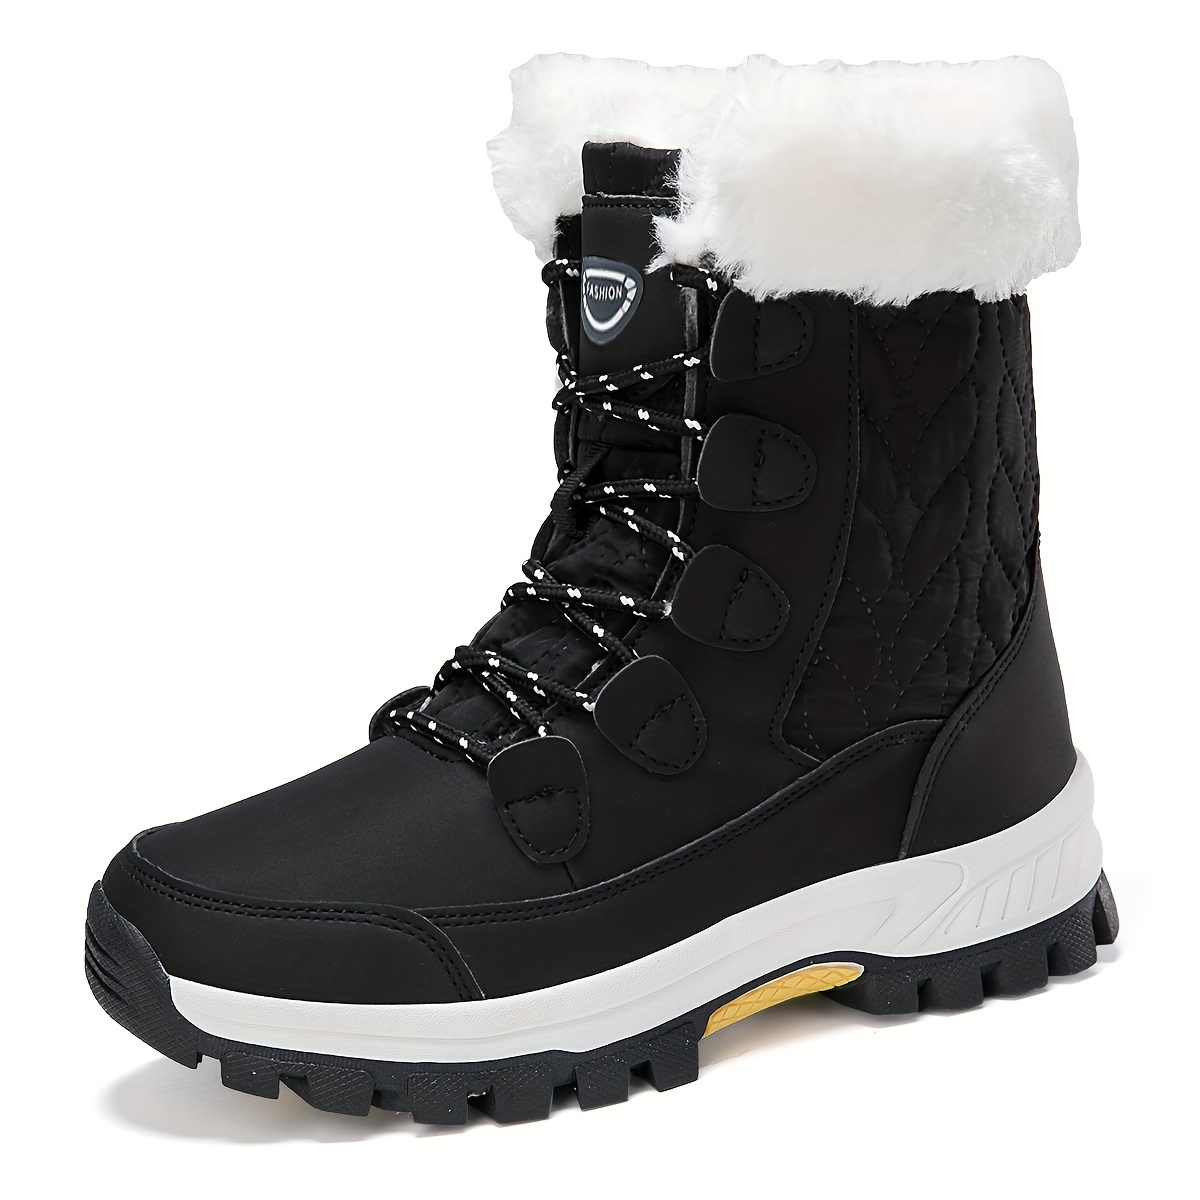 Winter High Top Boots Comfortable Casual Boot Rub Colors Anti